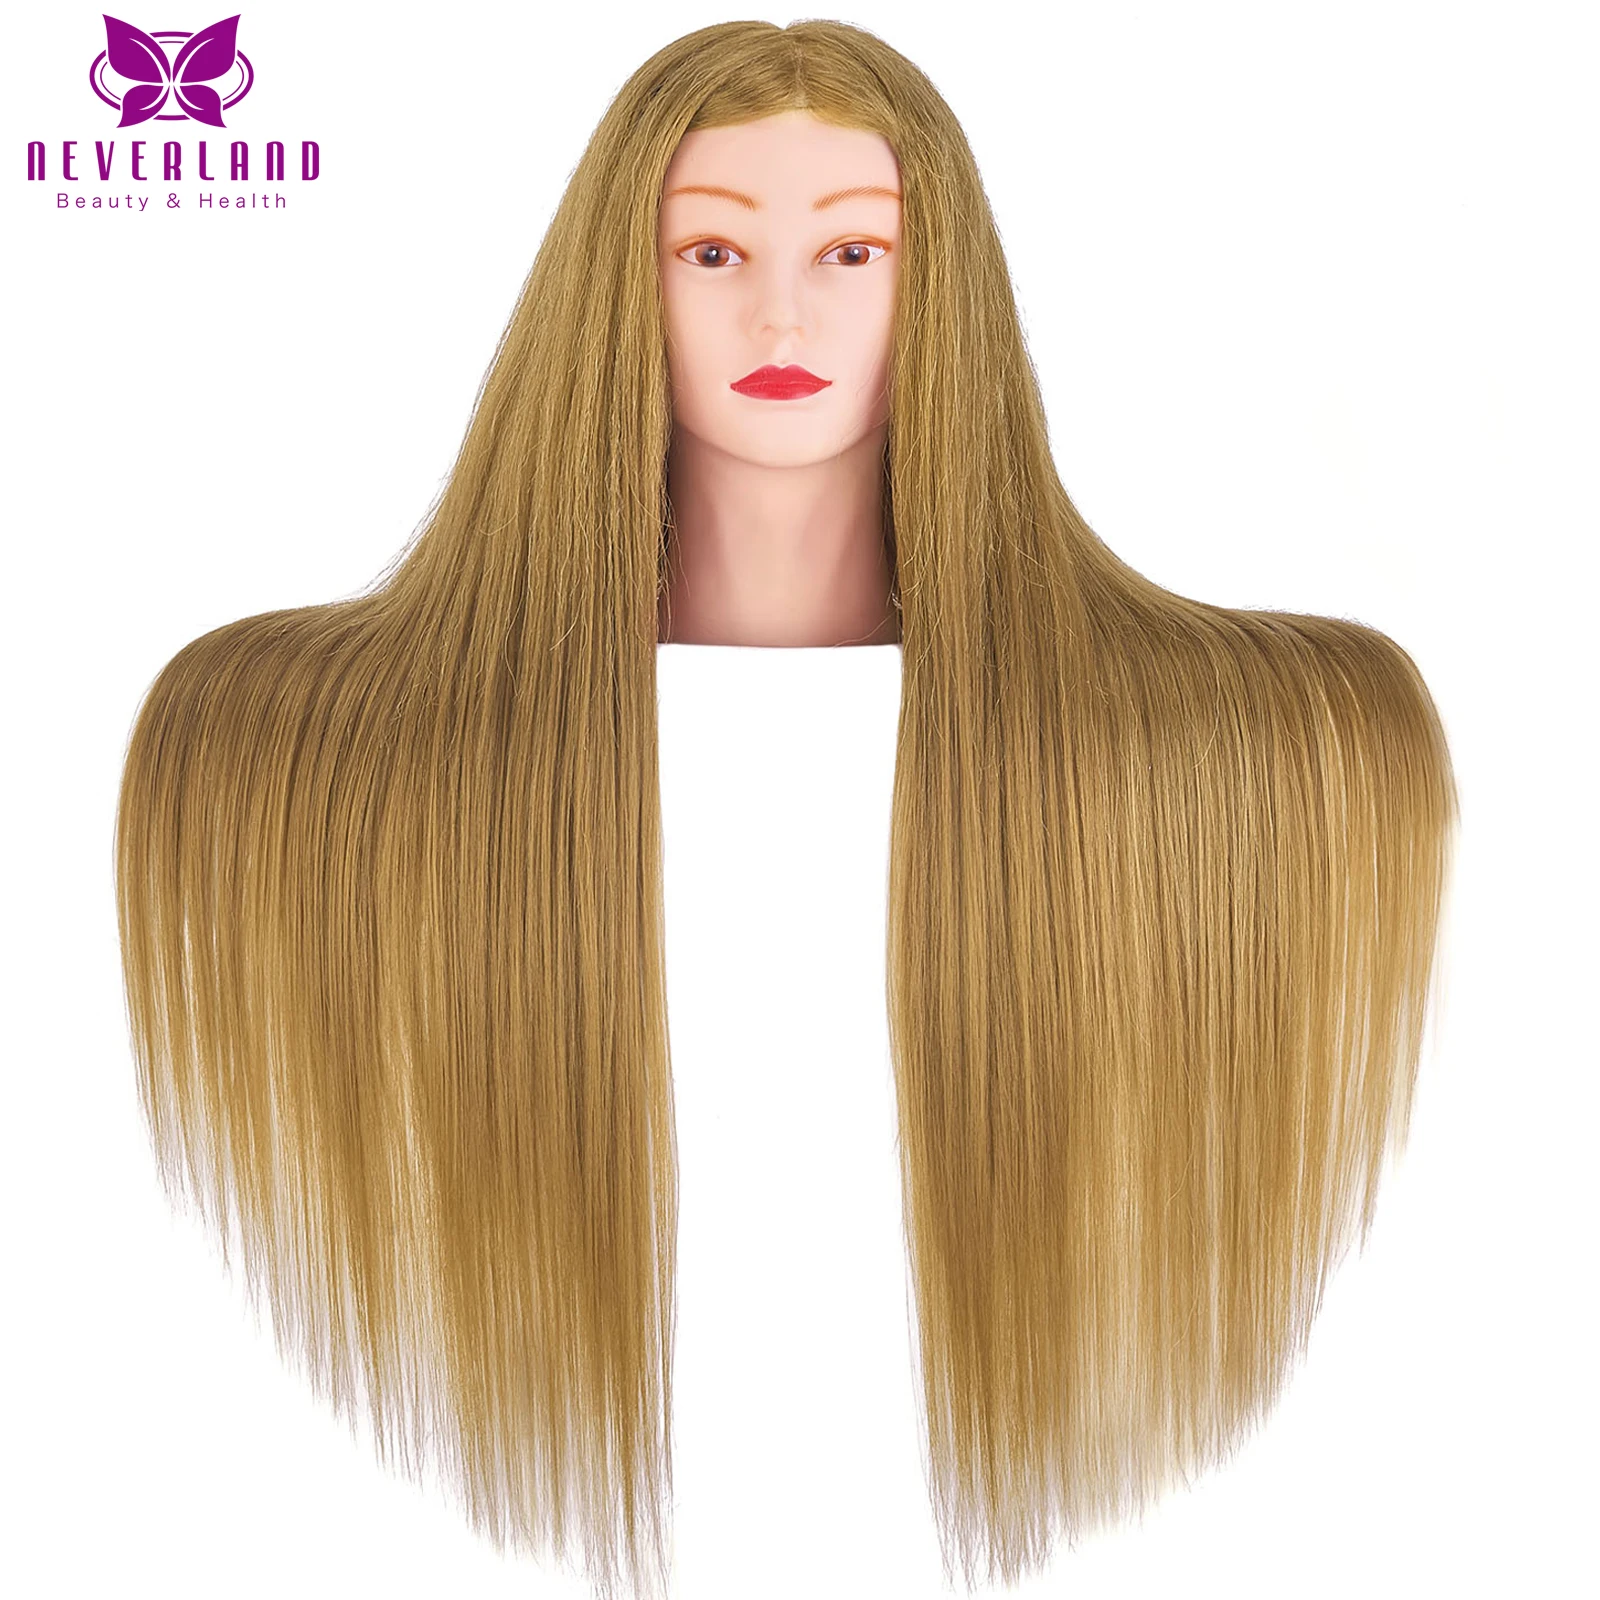 

Mannequin Woman Wig Head Hairstyle Styling Doll Head Hairdressers Practicing Braiding Dummy Head for Wig Training Head Kit